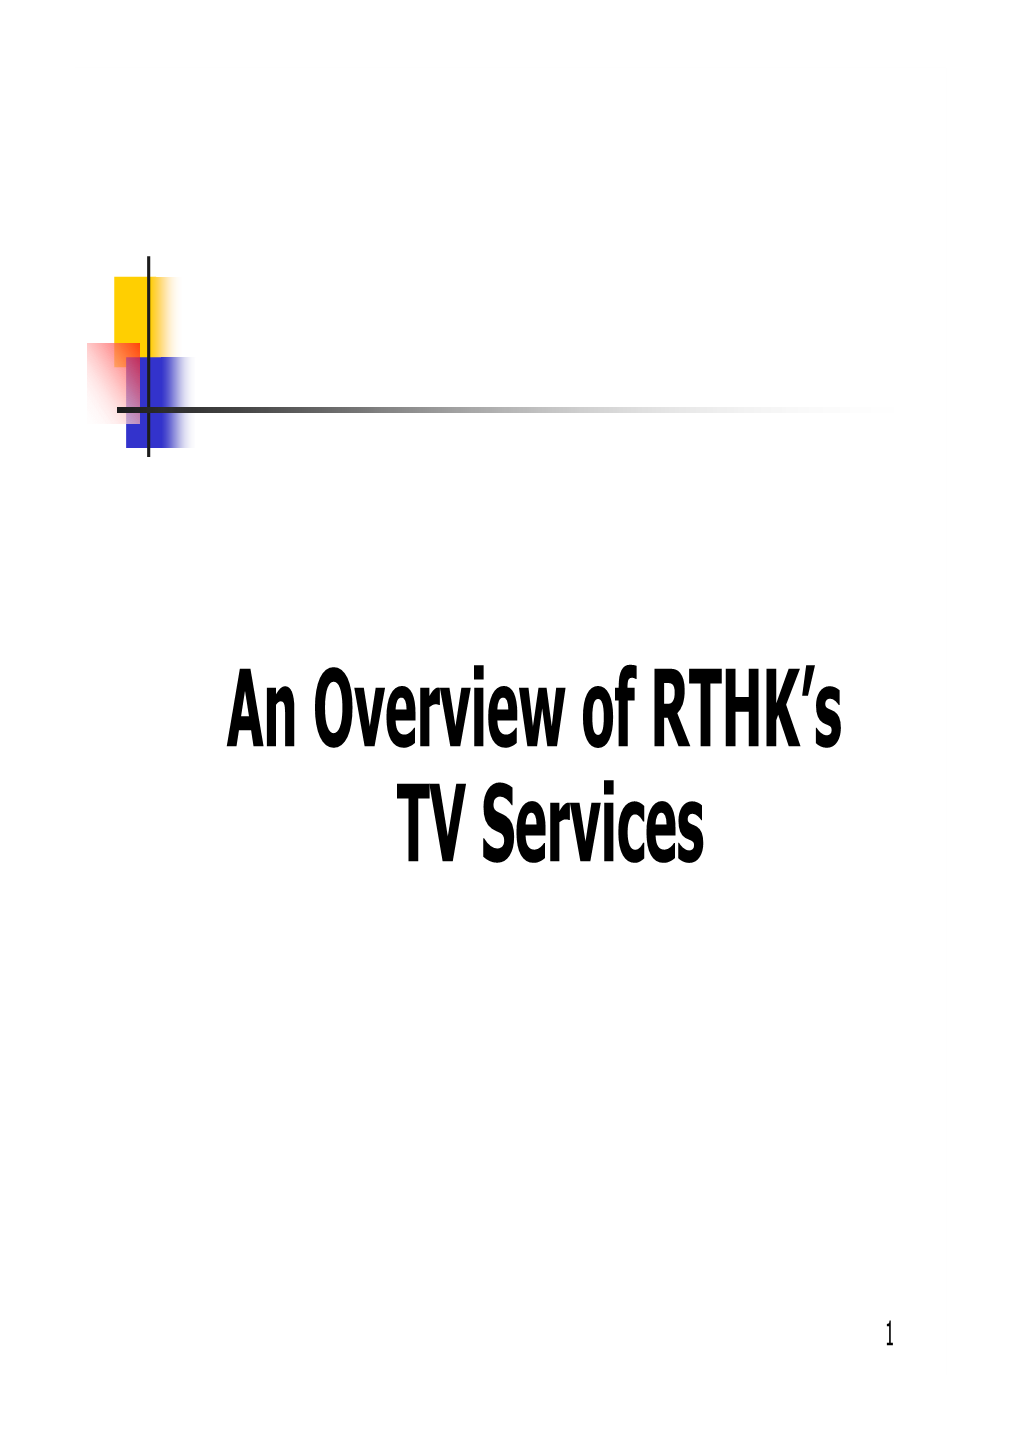 An Overview of RTHK's TV Services